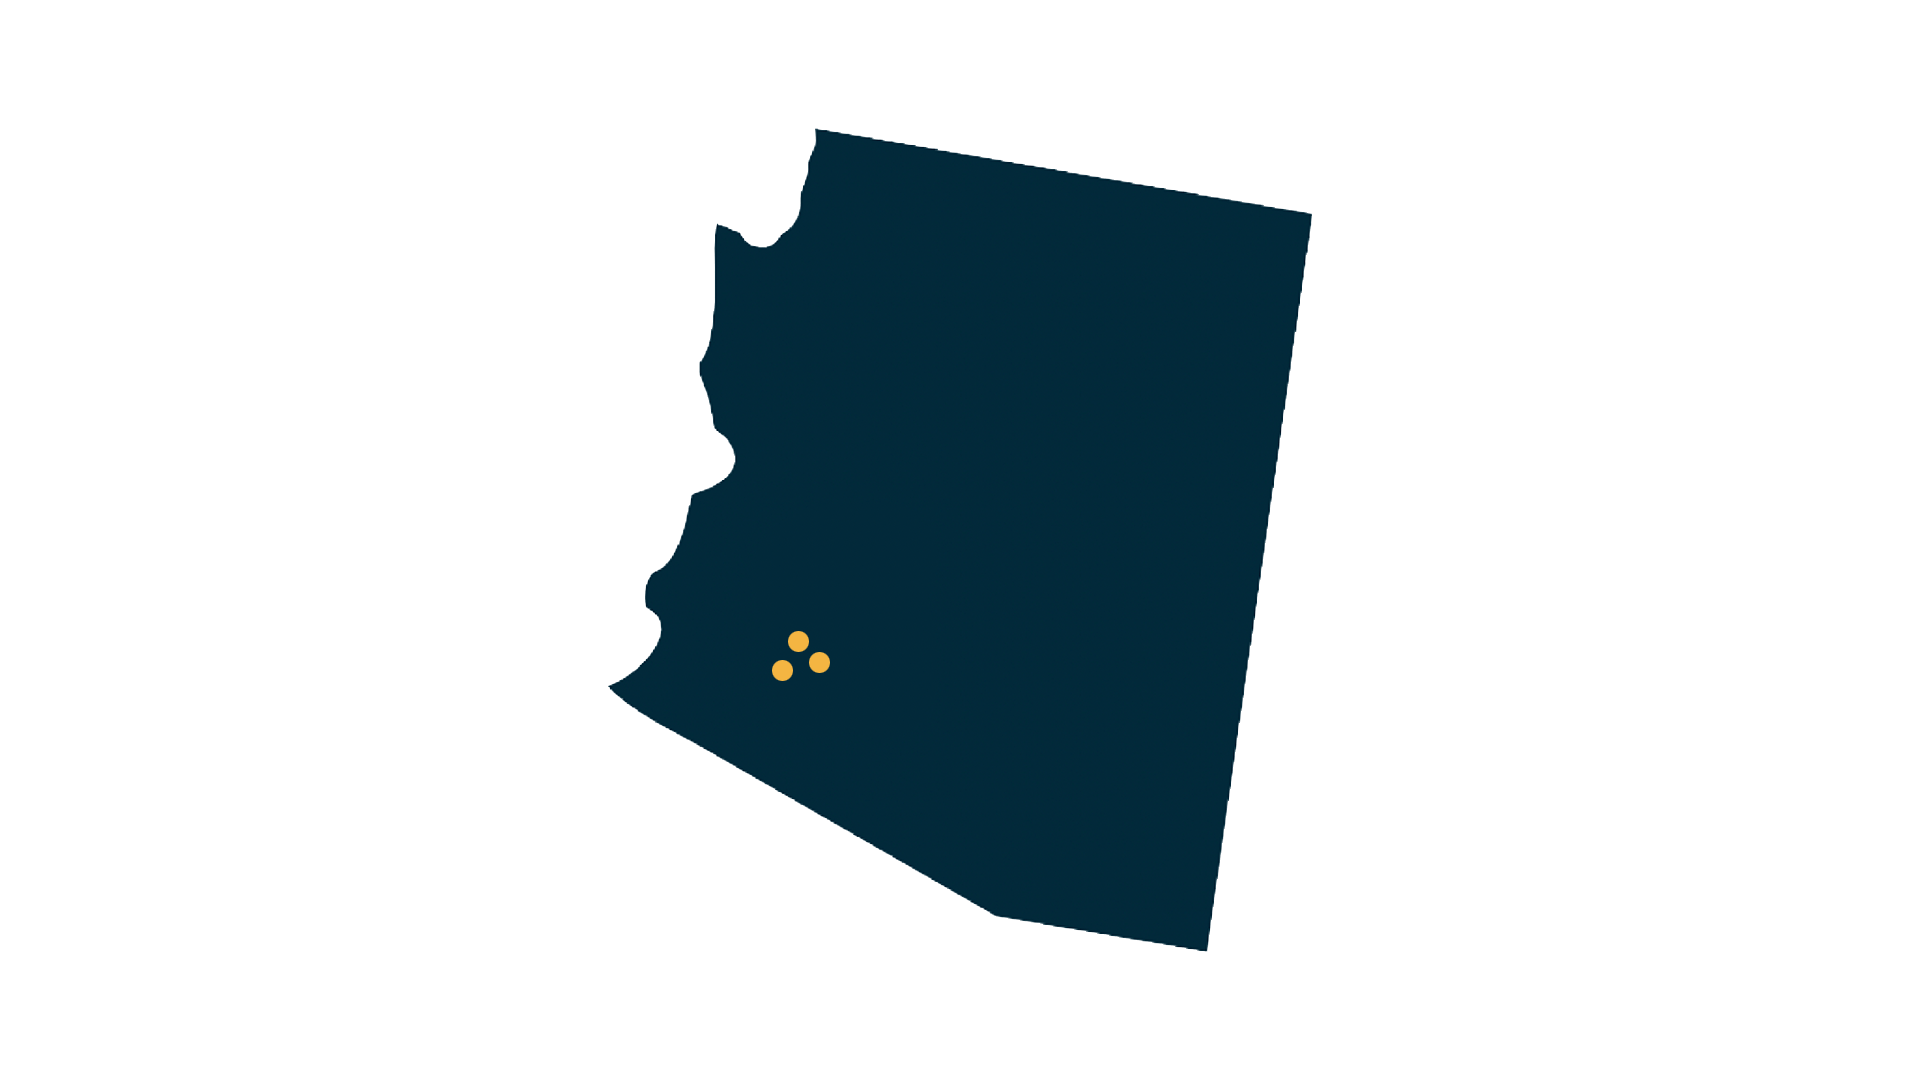 Amazon Phoenix NHC locations in a Texas state shape vector